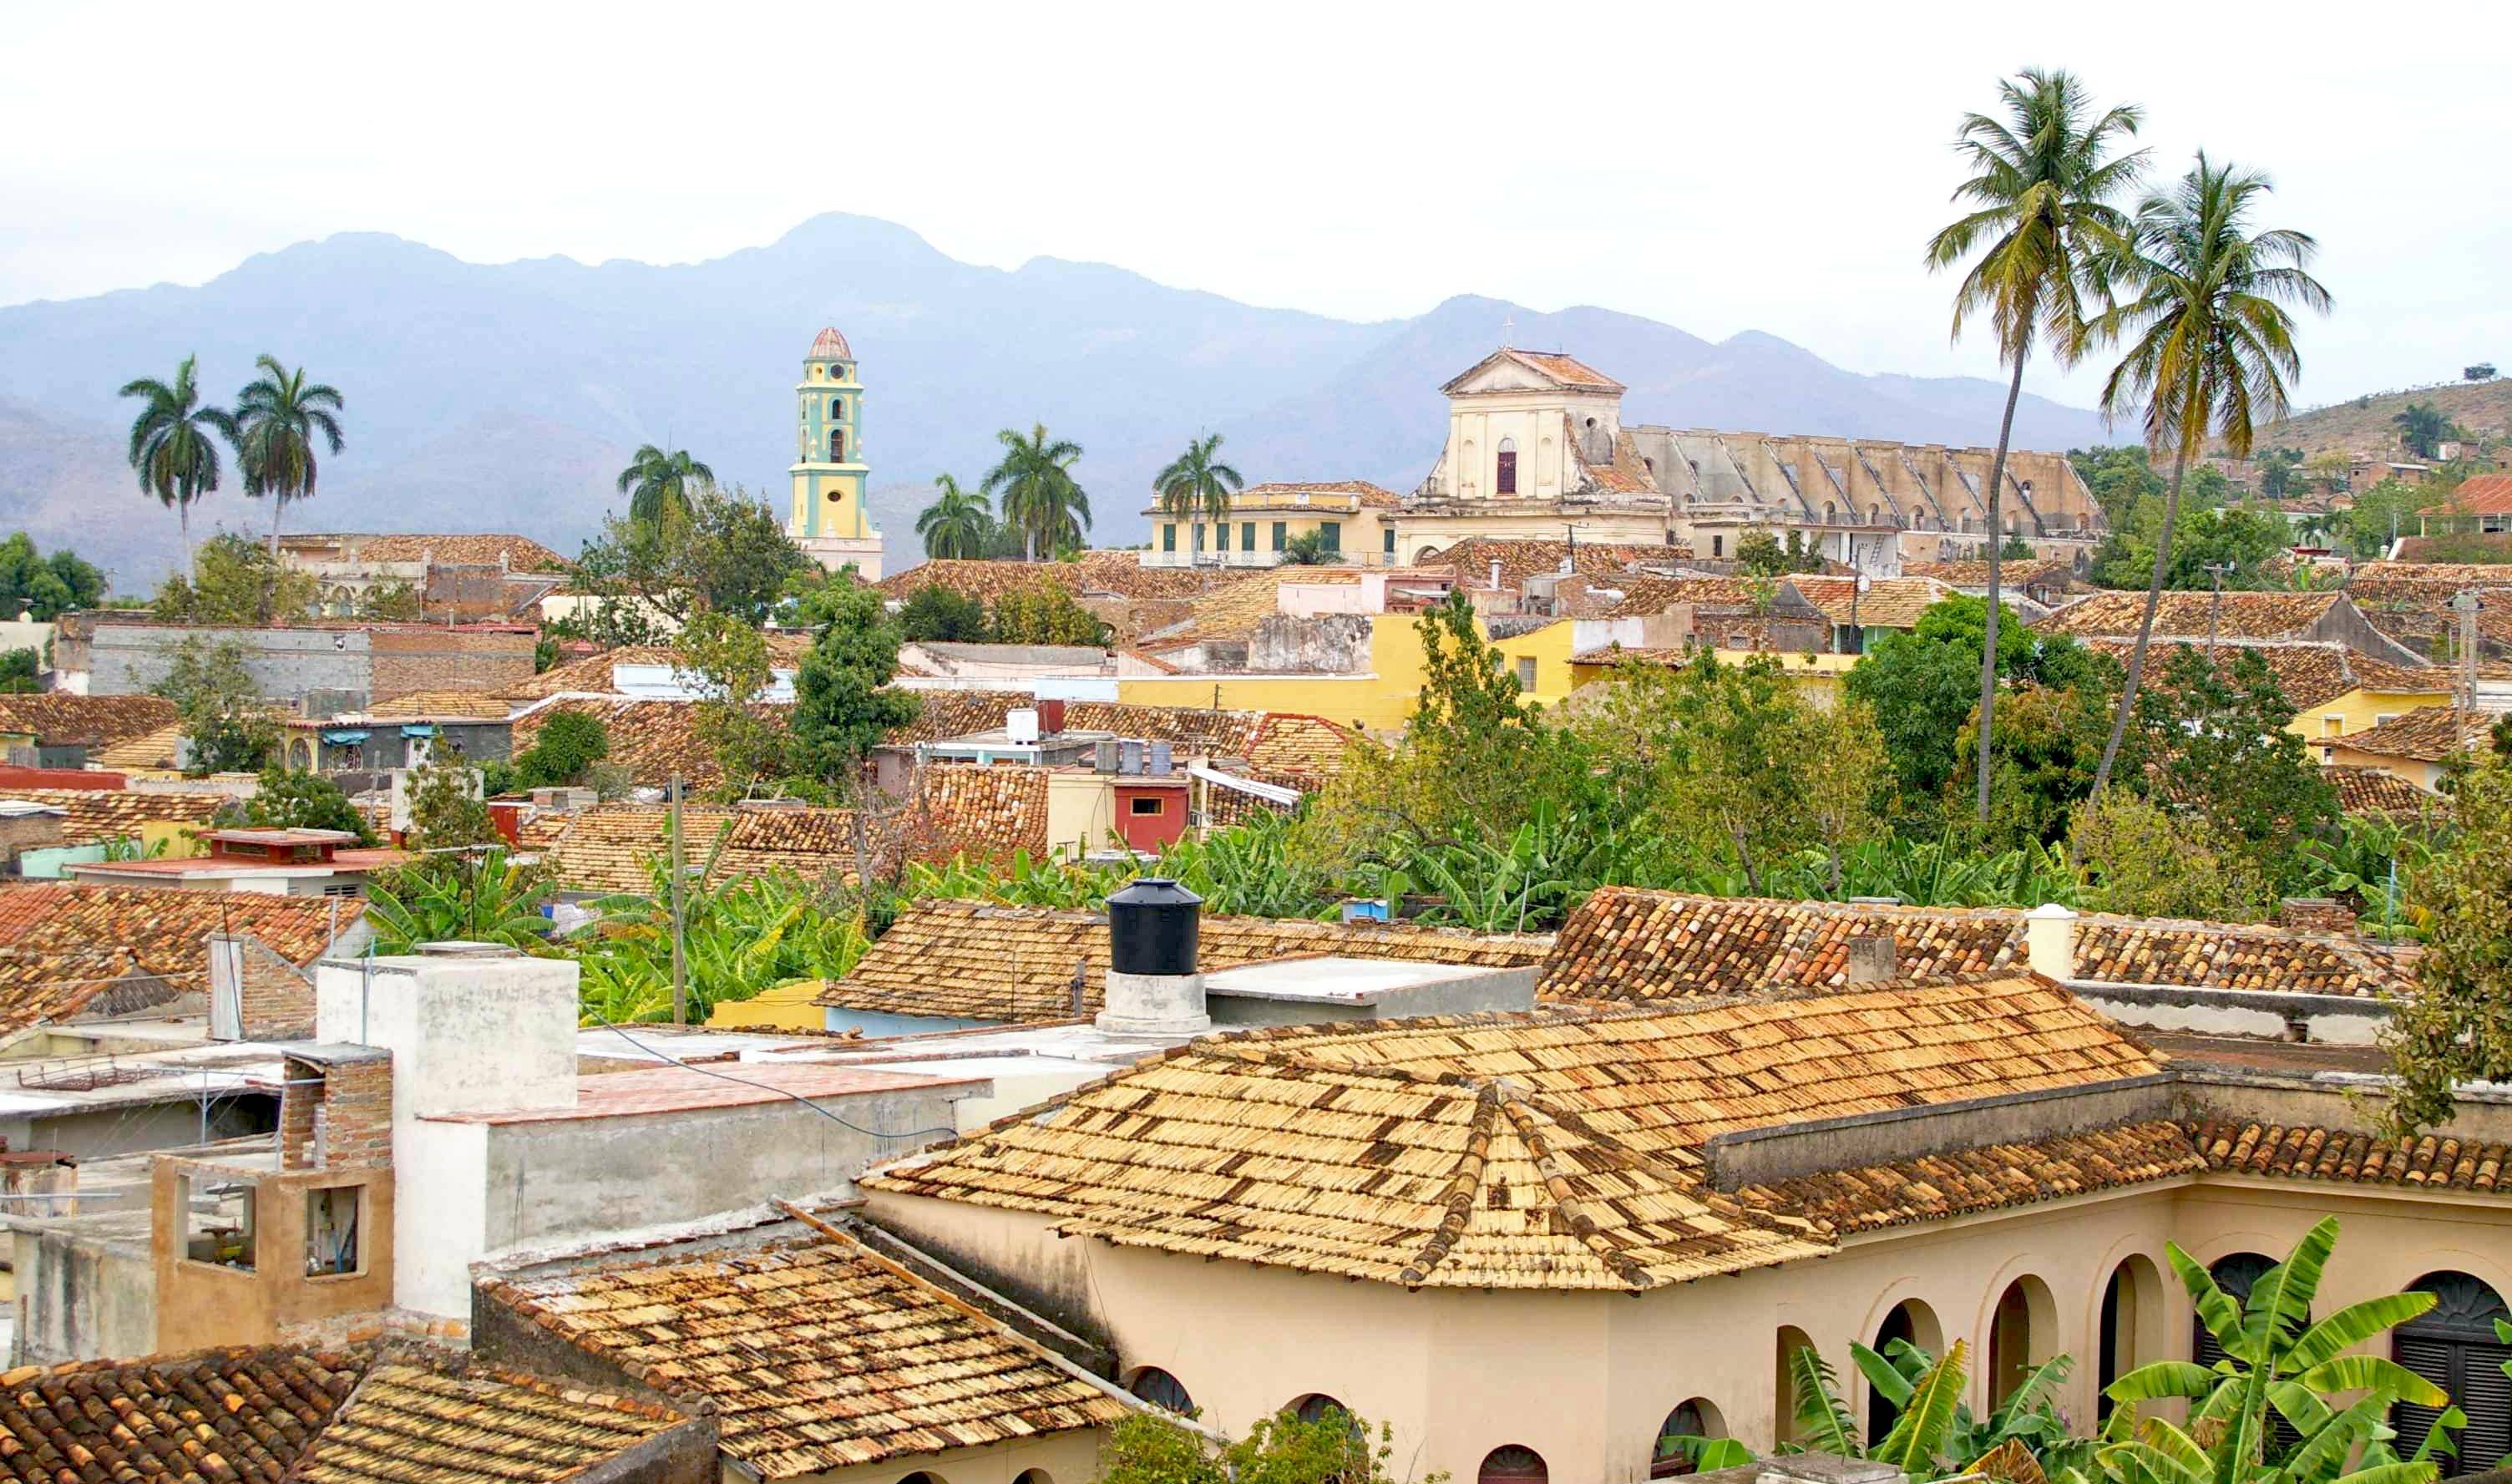 A view over the the city of Trinidad in Cuba, with the Sierra Maestra in the background